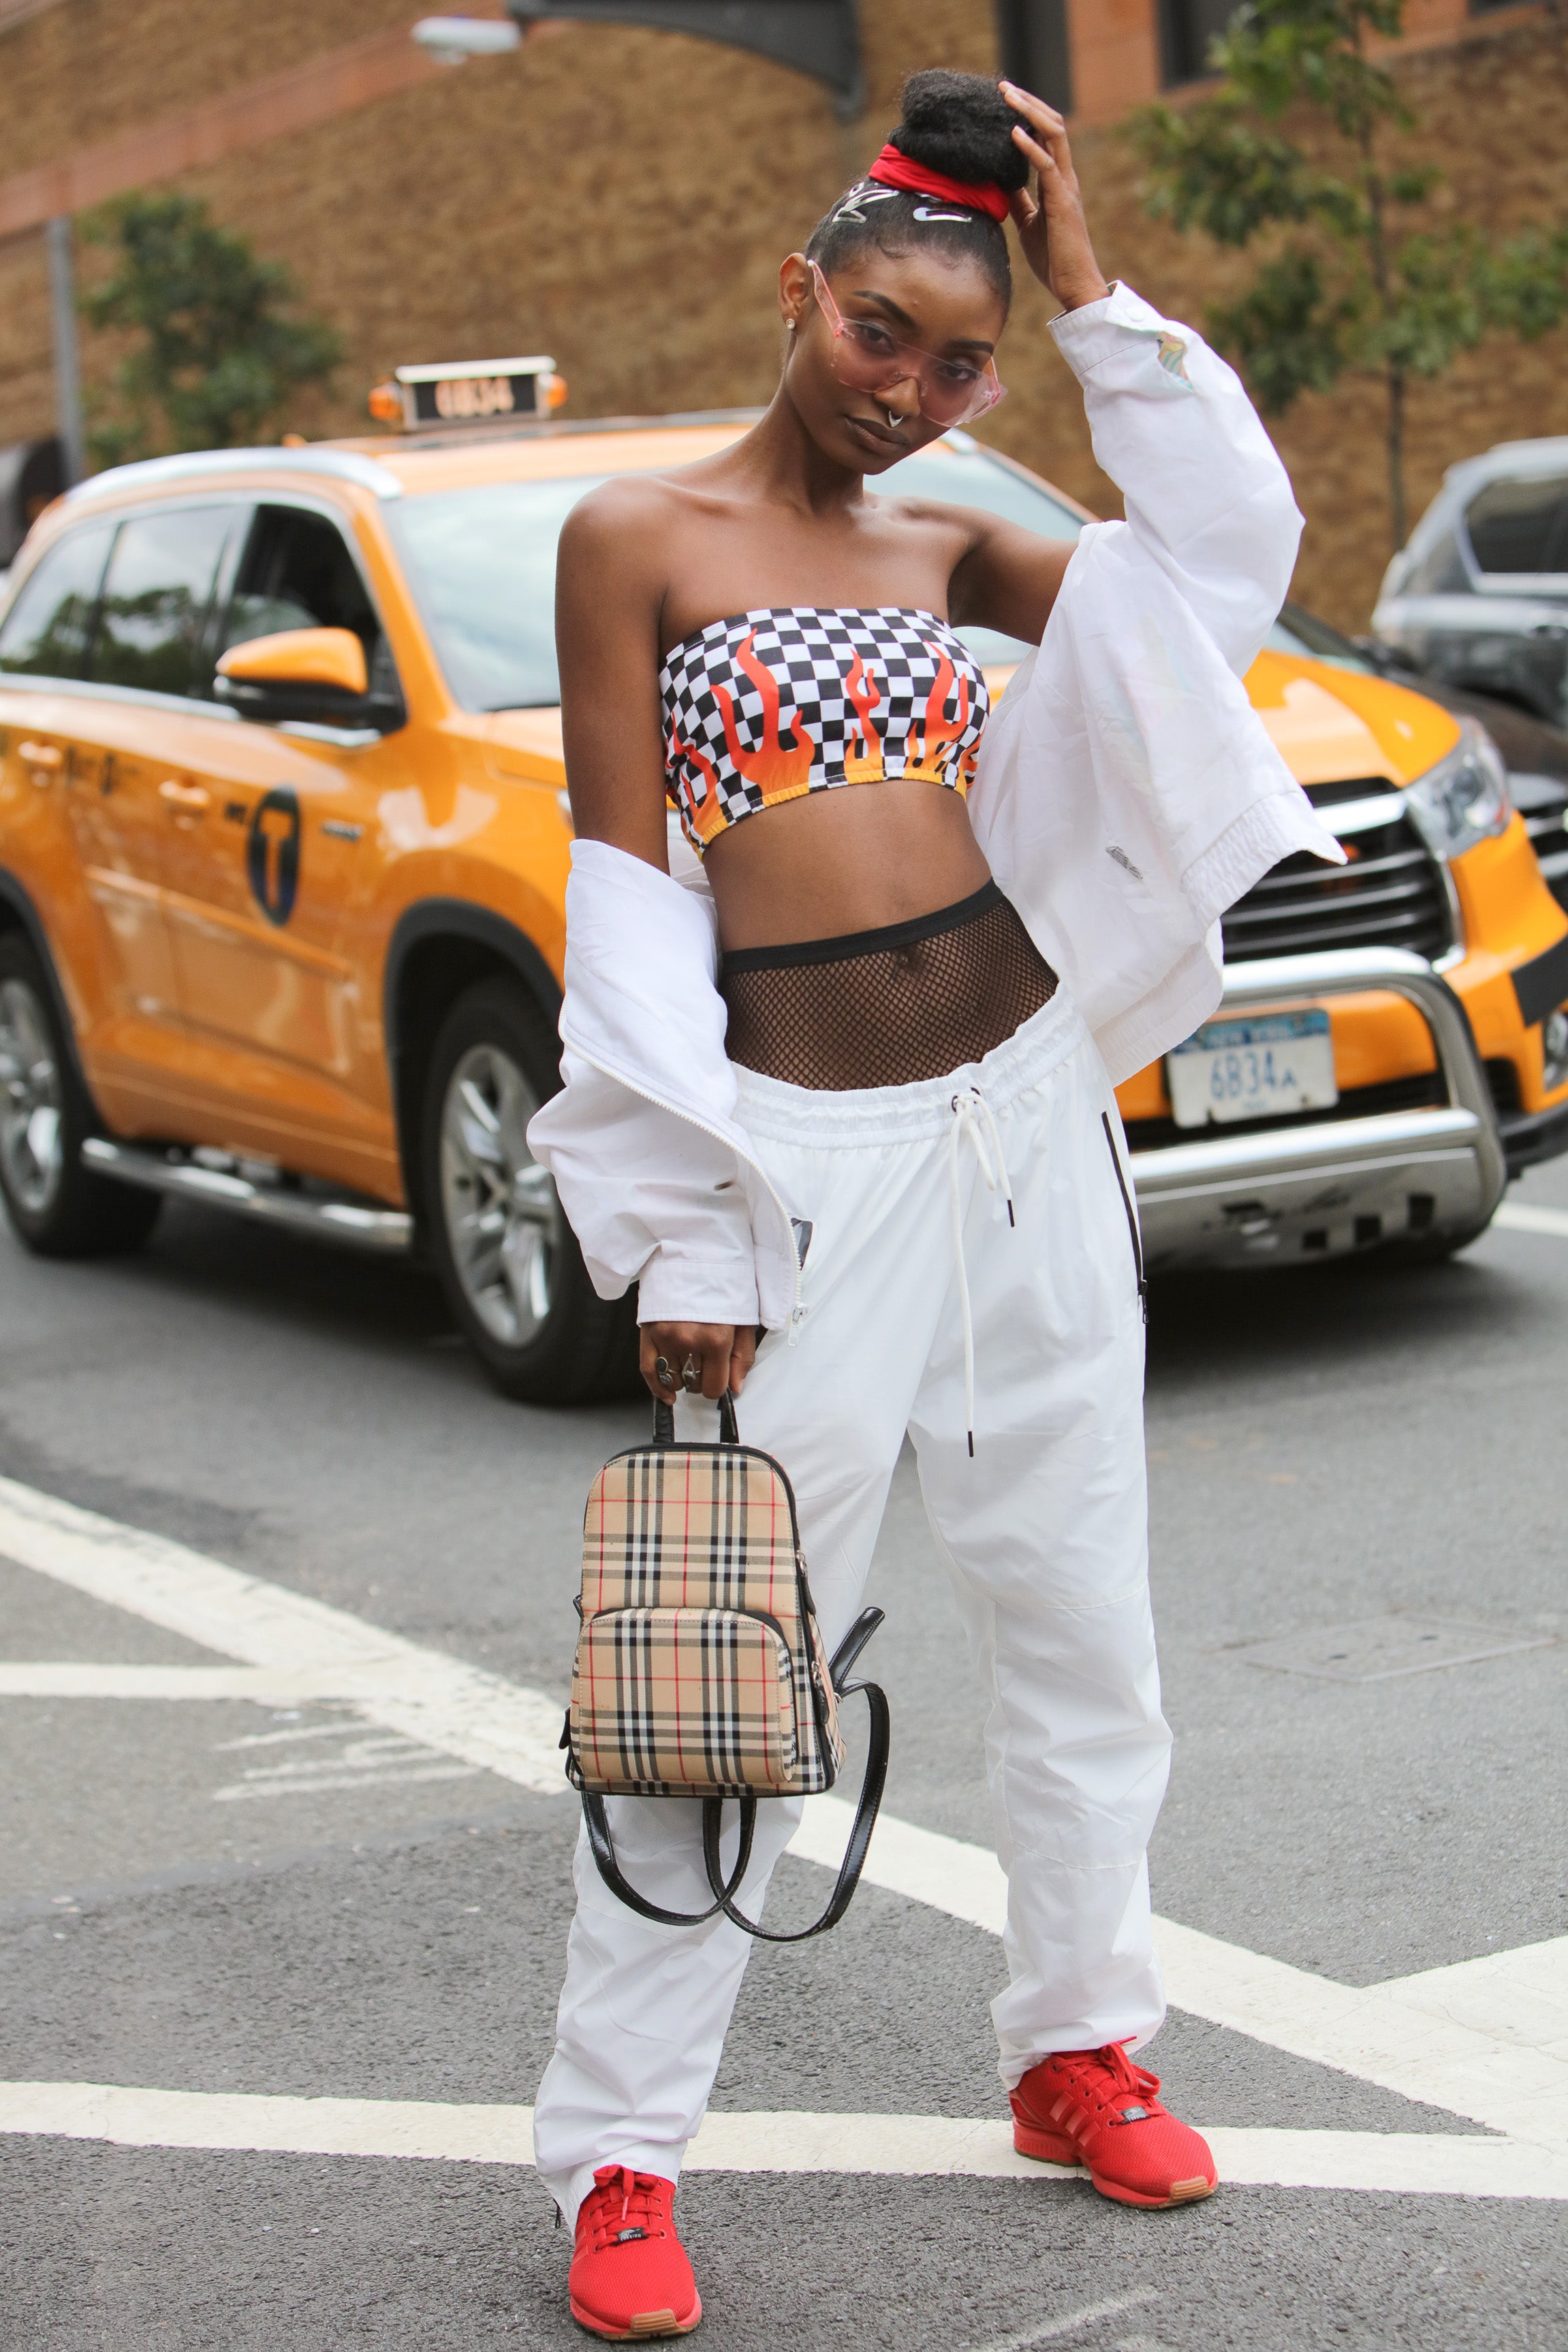 All The Glorious Street Style Looks From New York Fashion Week
